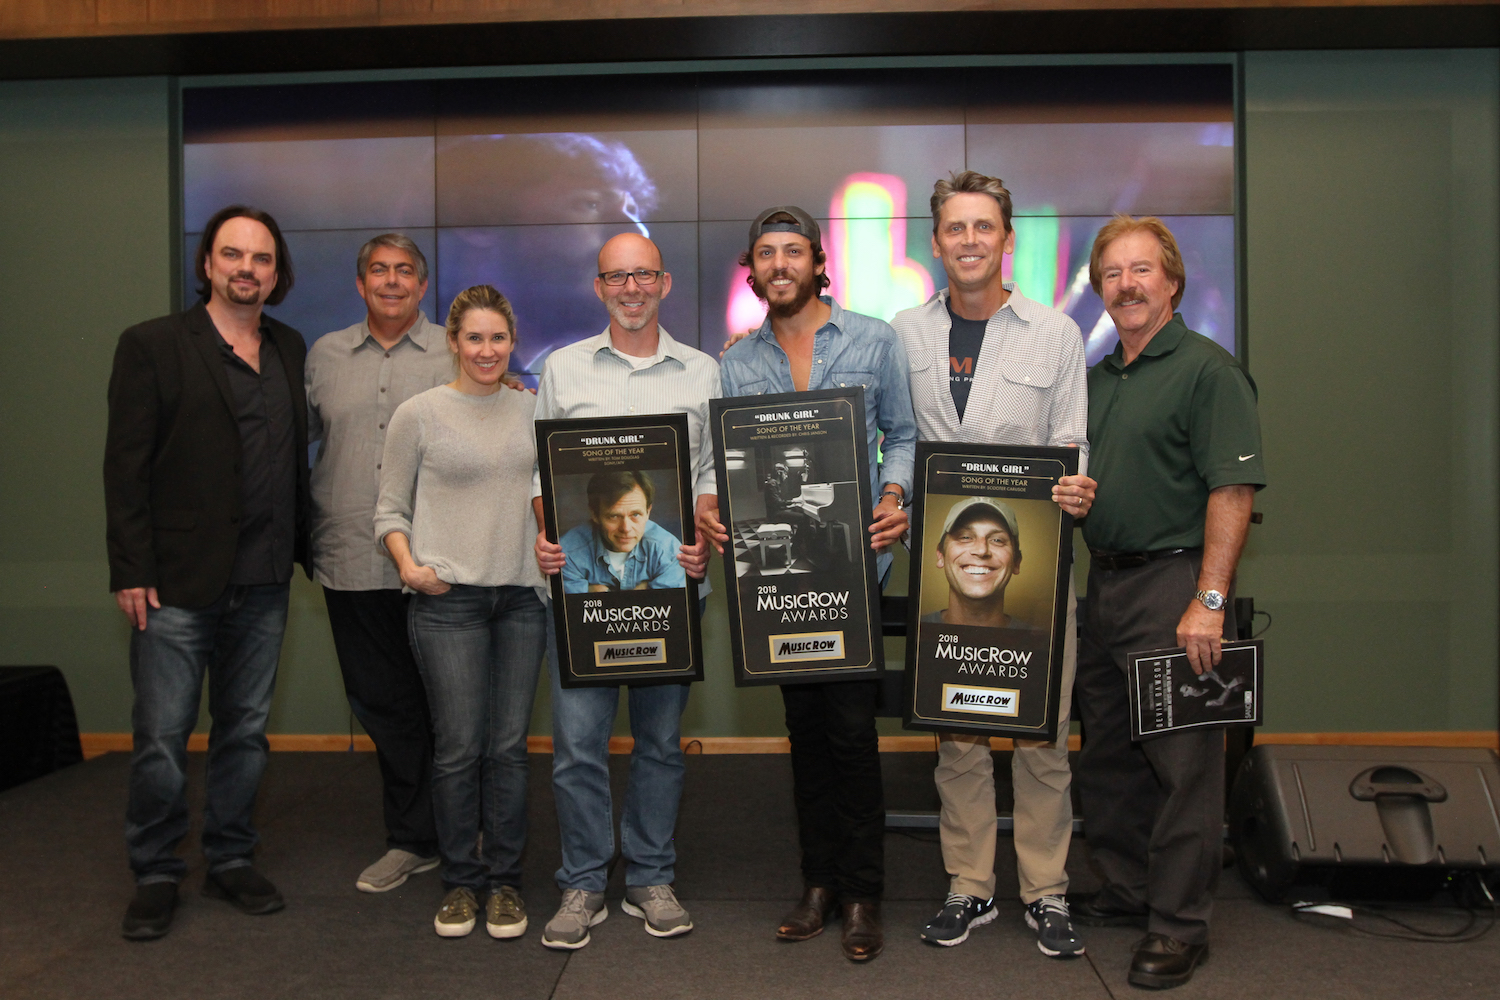 Chris Janson’s “Drunk Girl” Takes Home Song of the Year at MusicRow Awards